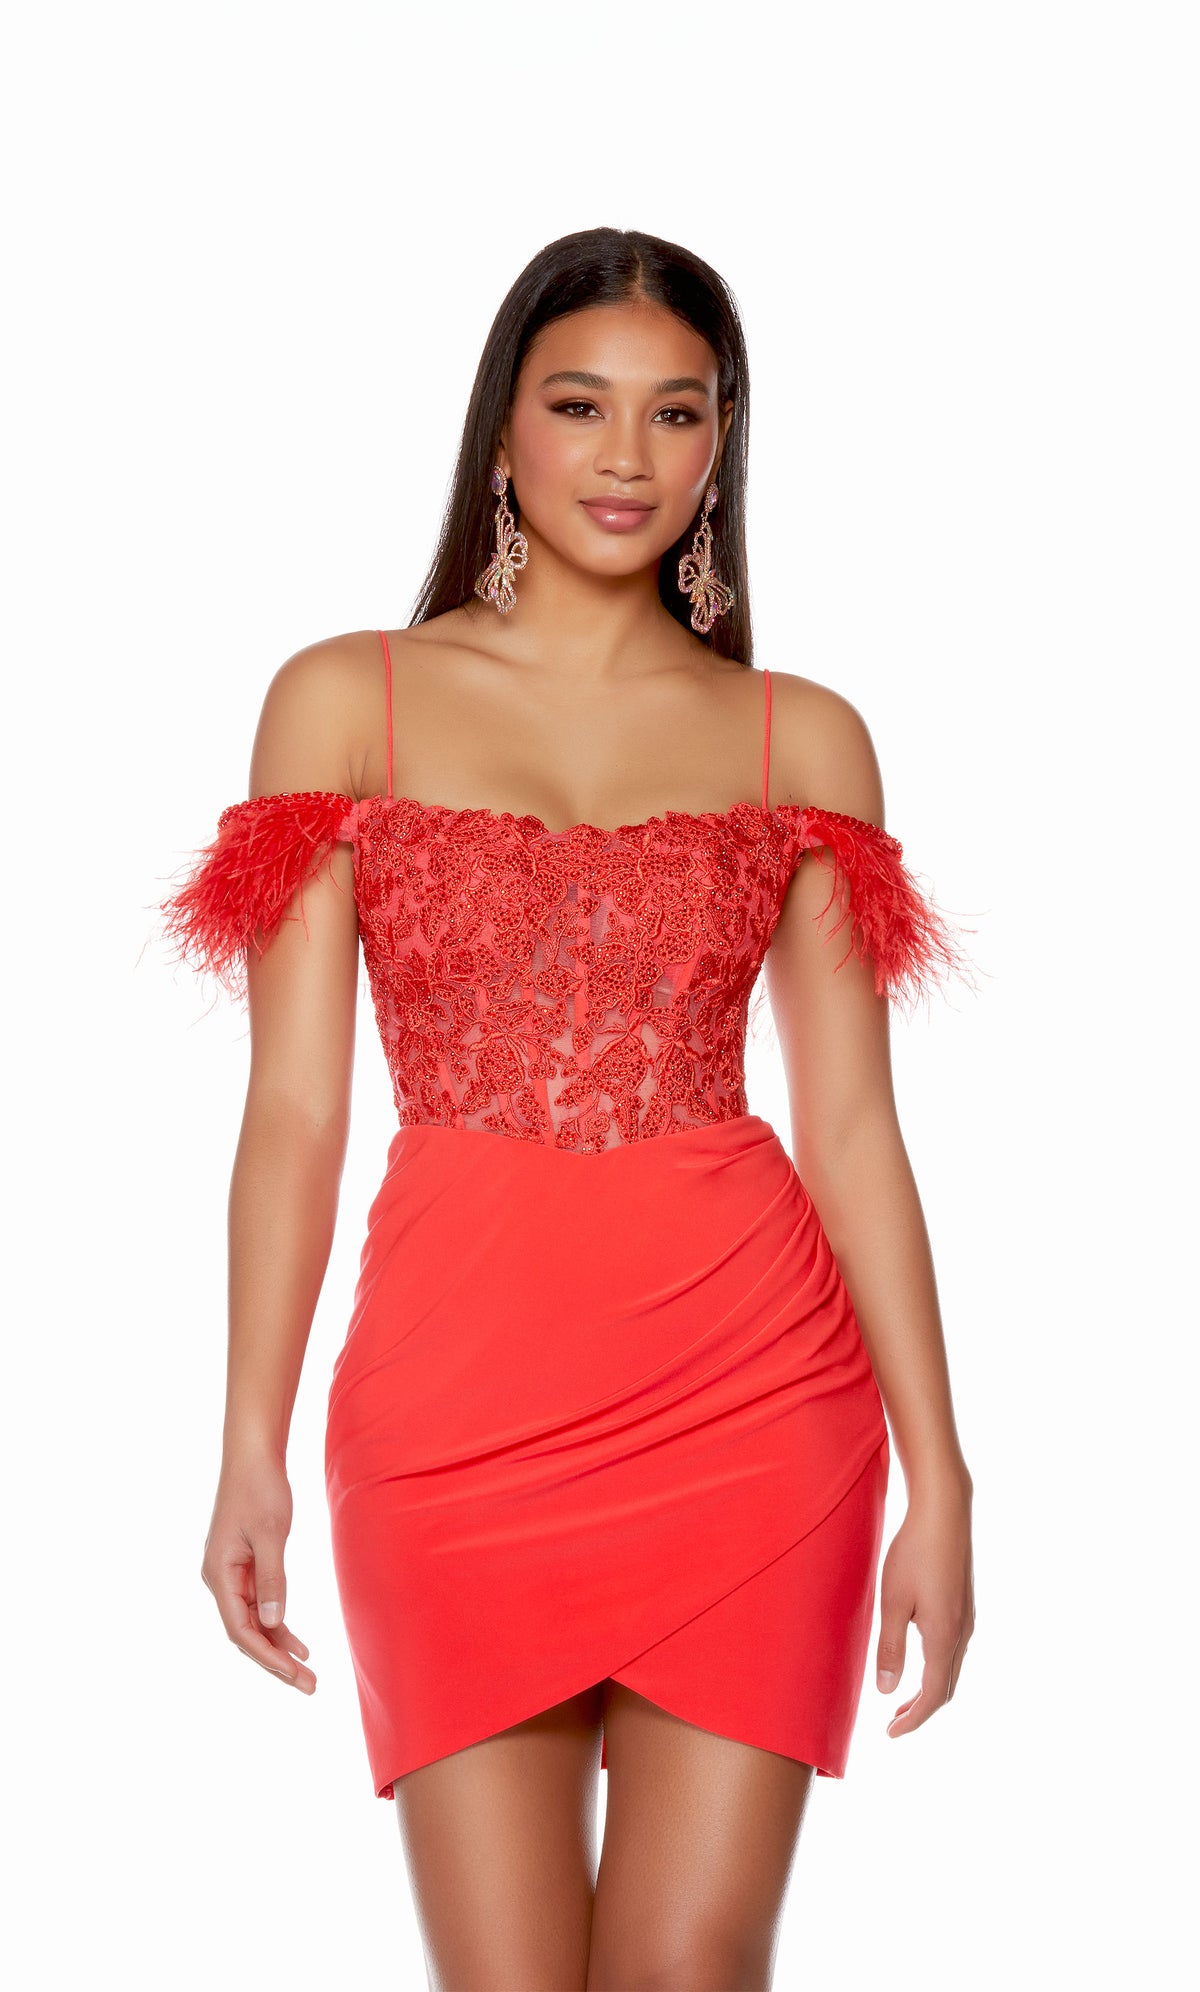 A spicy red corset dress with a sheer lace bodice, feather trim sleeves, and spaghetti straps. The skirt has a fun asymmetrical hem and is crafted from a stretchy, Jersey fabric.